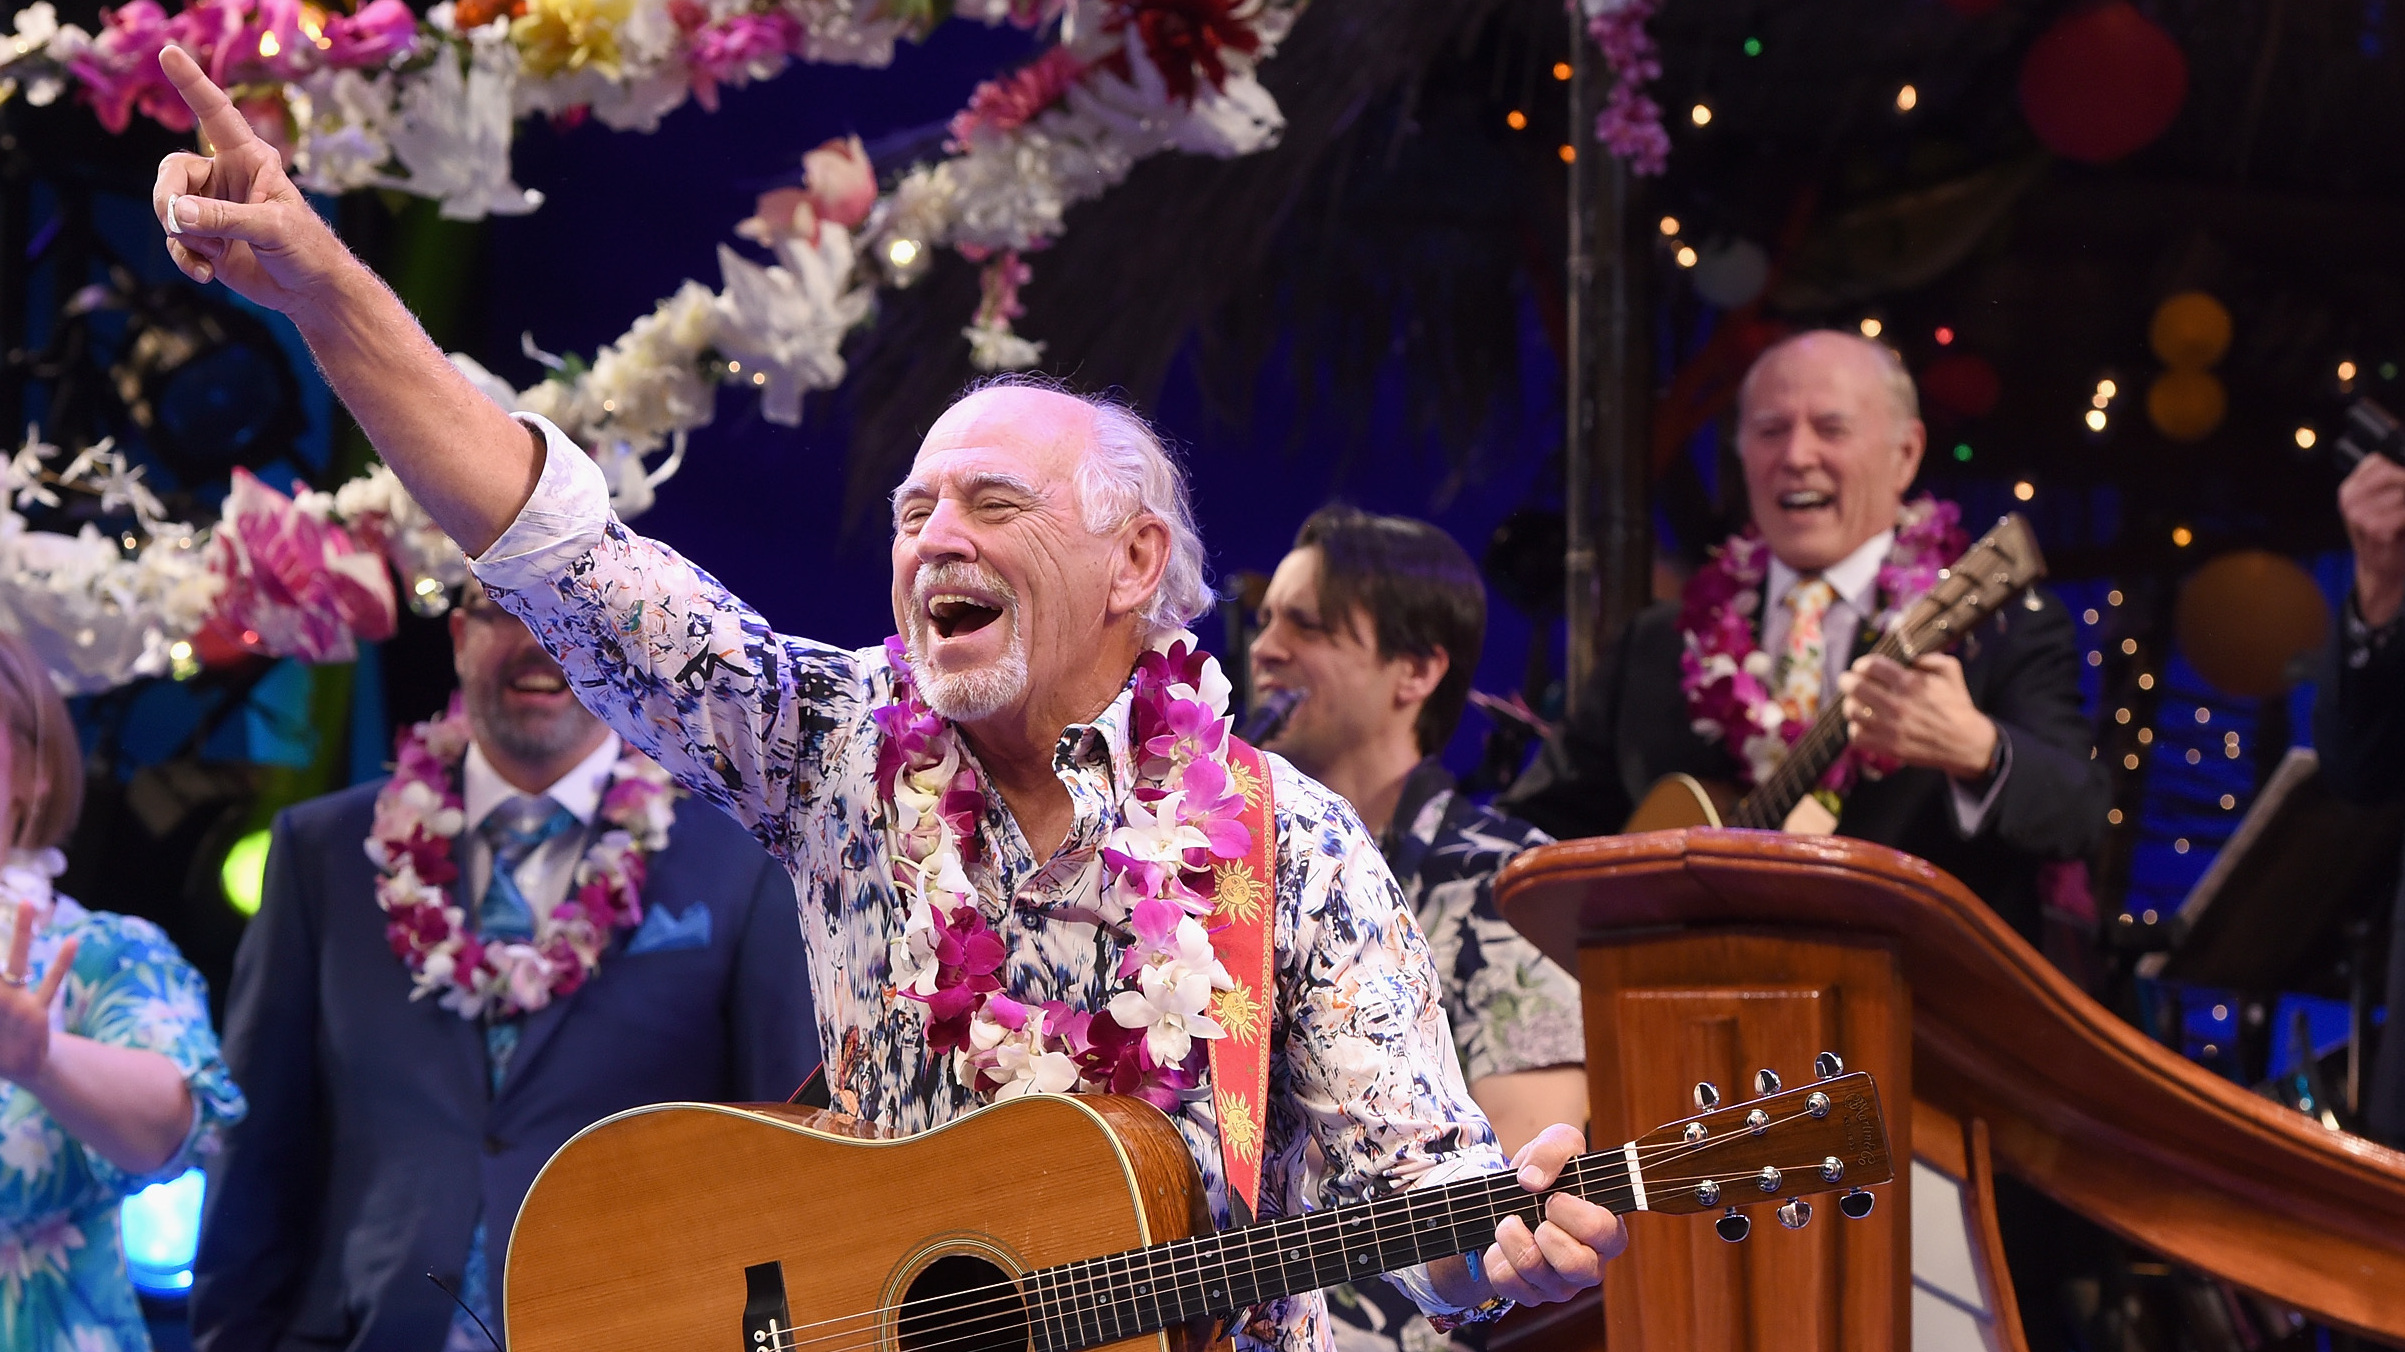 Man in hawaiian shirt and flower lei holds guitar in one hand and points finger up, mouth open